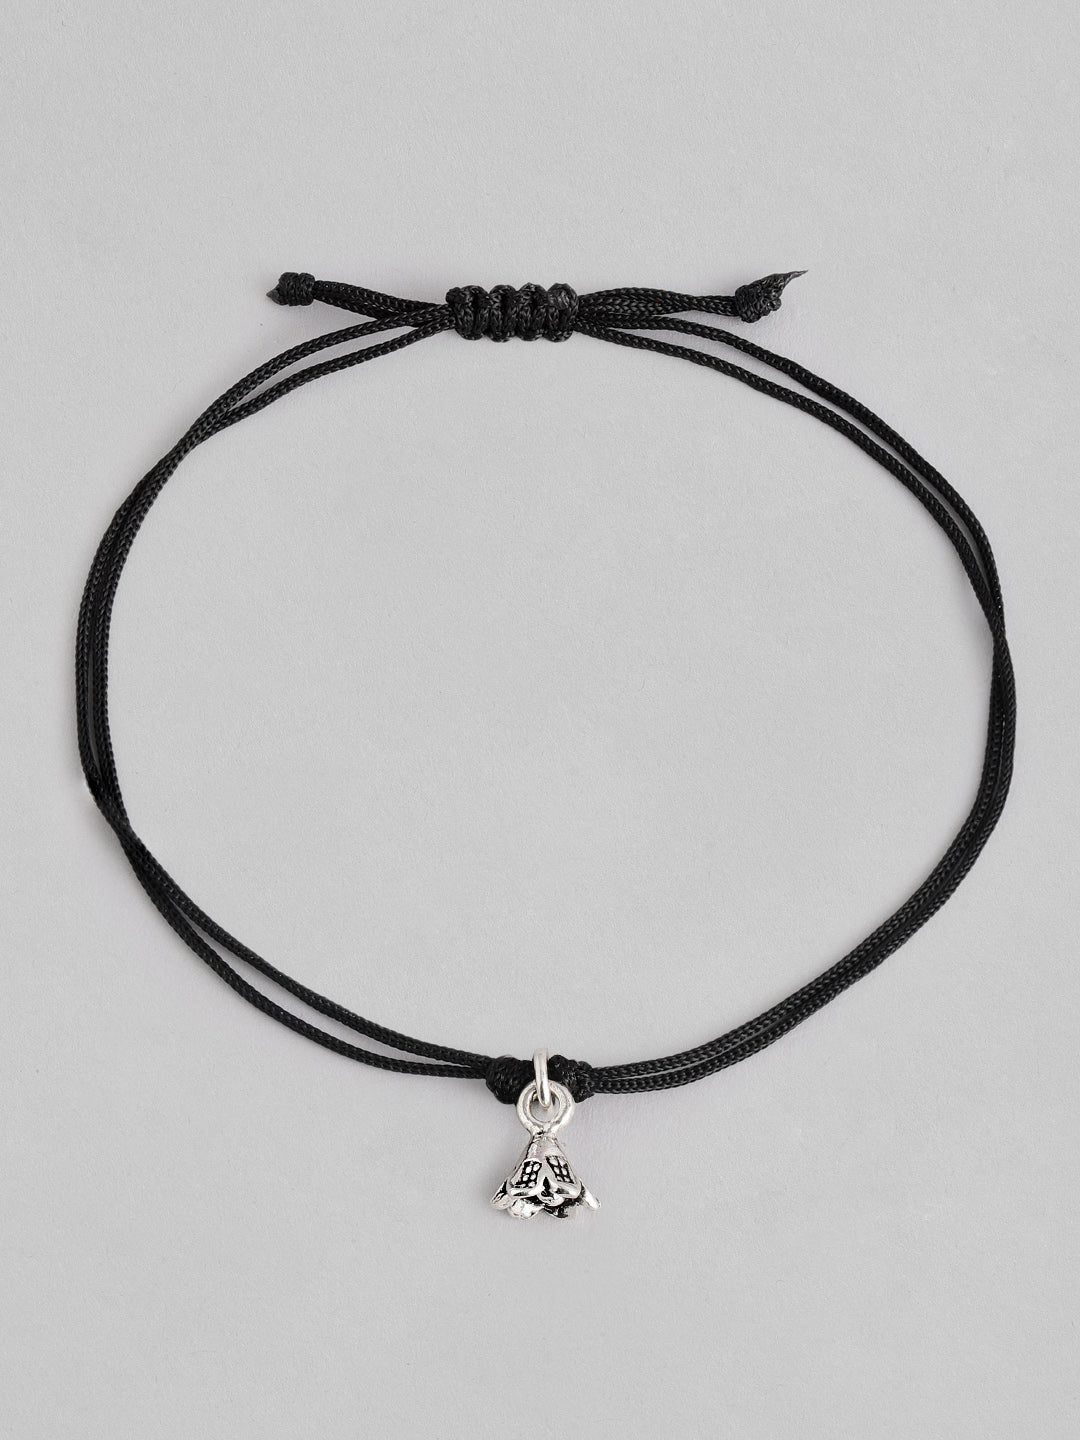 Black Thread Tribal Inspired Anklet With 925 Sterling Silver Flower Charms